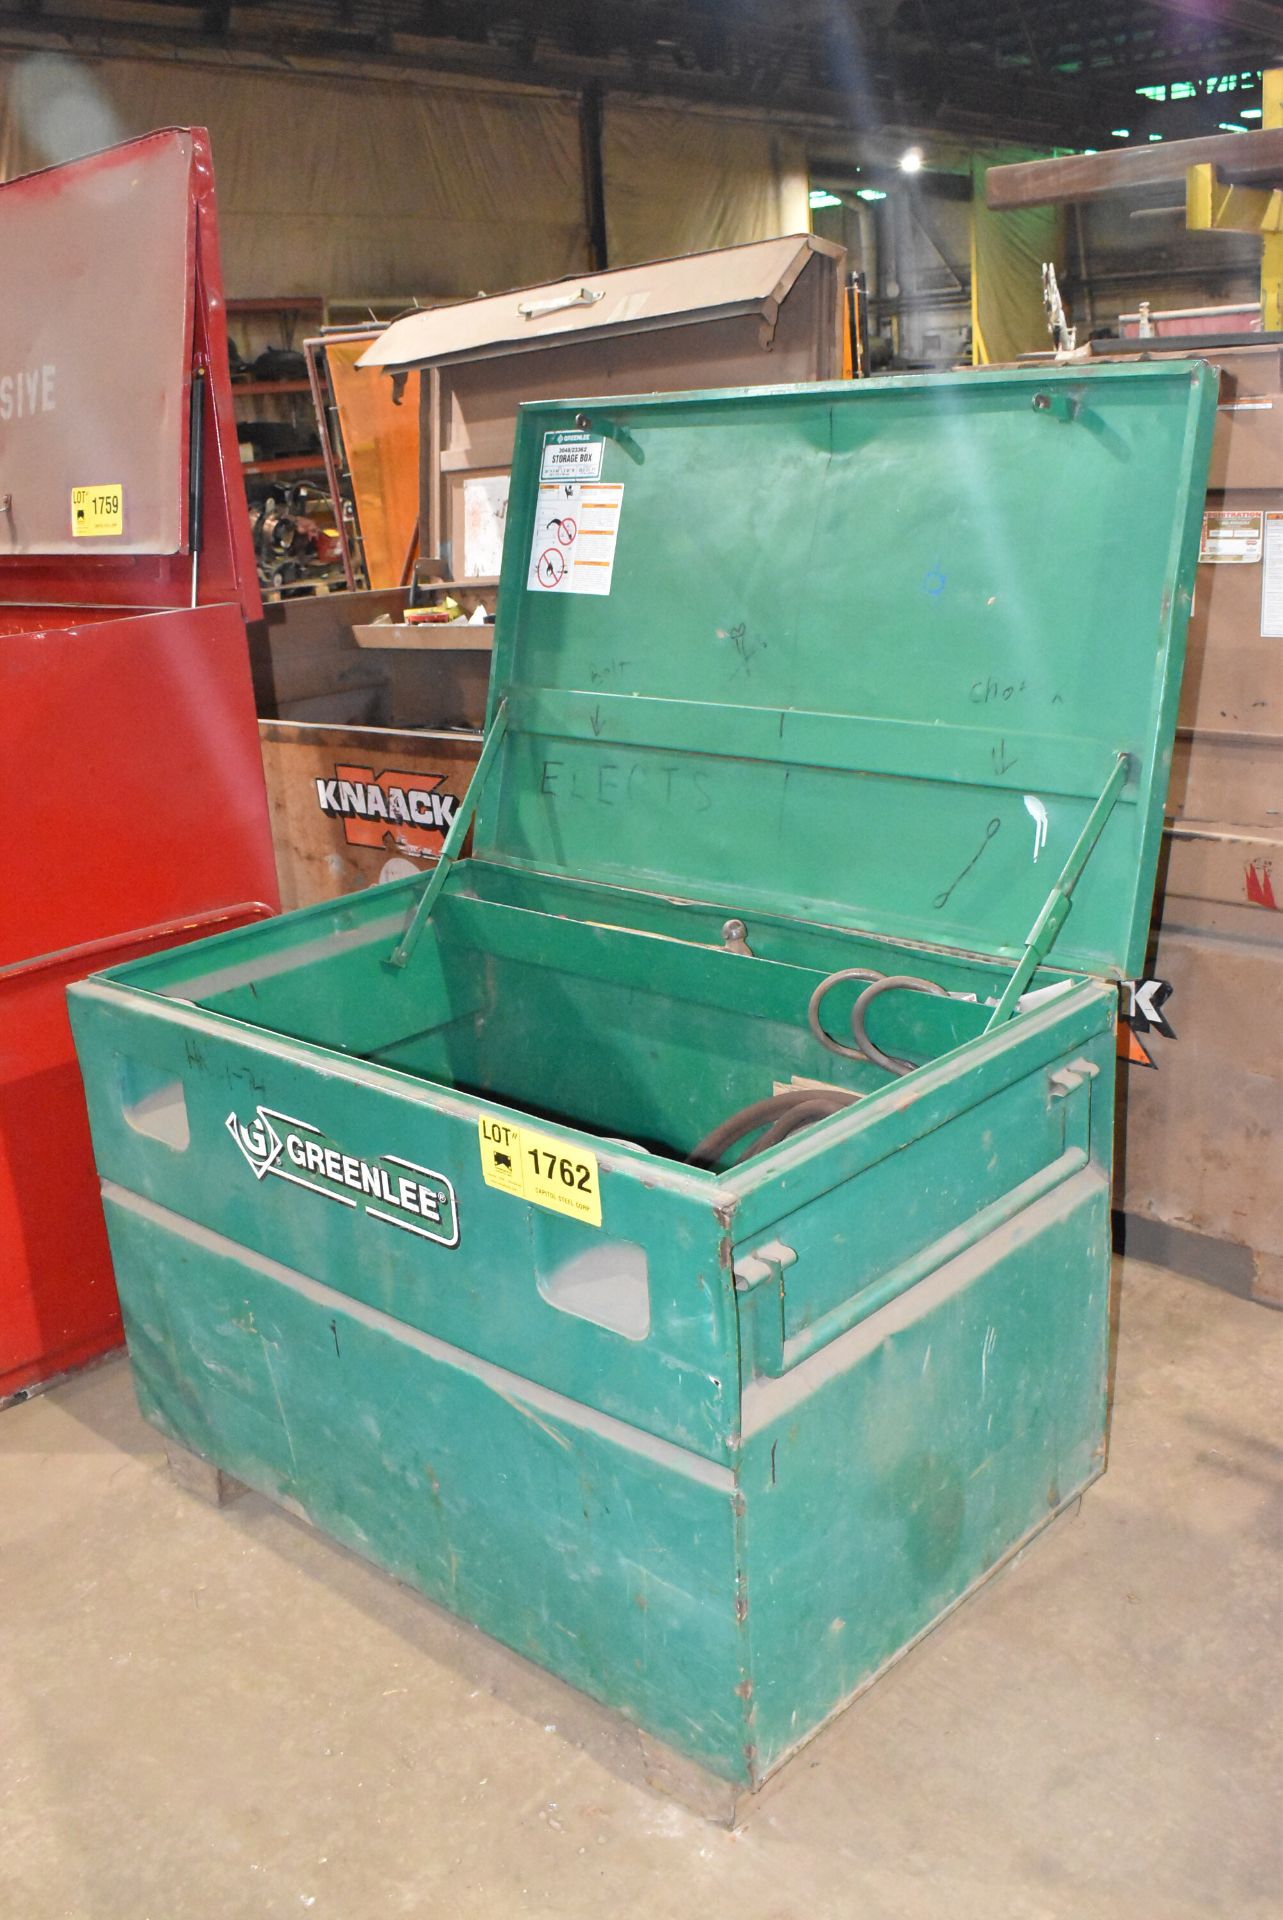 LOT/ GREENLEE JOB BOX WITH CONTENTS - INCLUDING TOOLS, HOSE & SUPPLIES [RIGGING FEES FOR LOT #1762 -